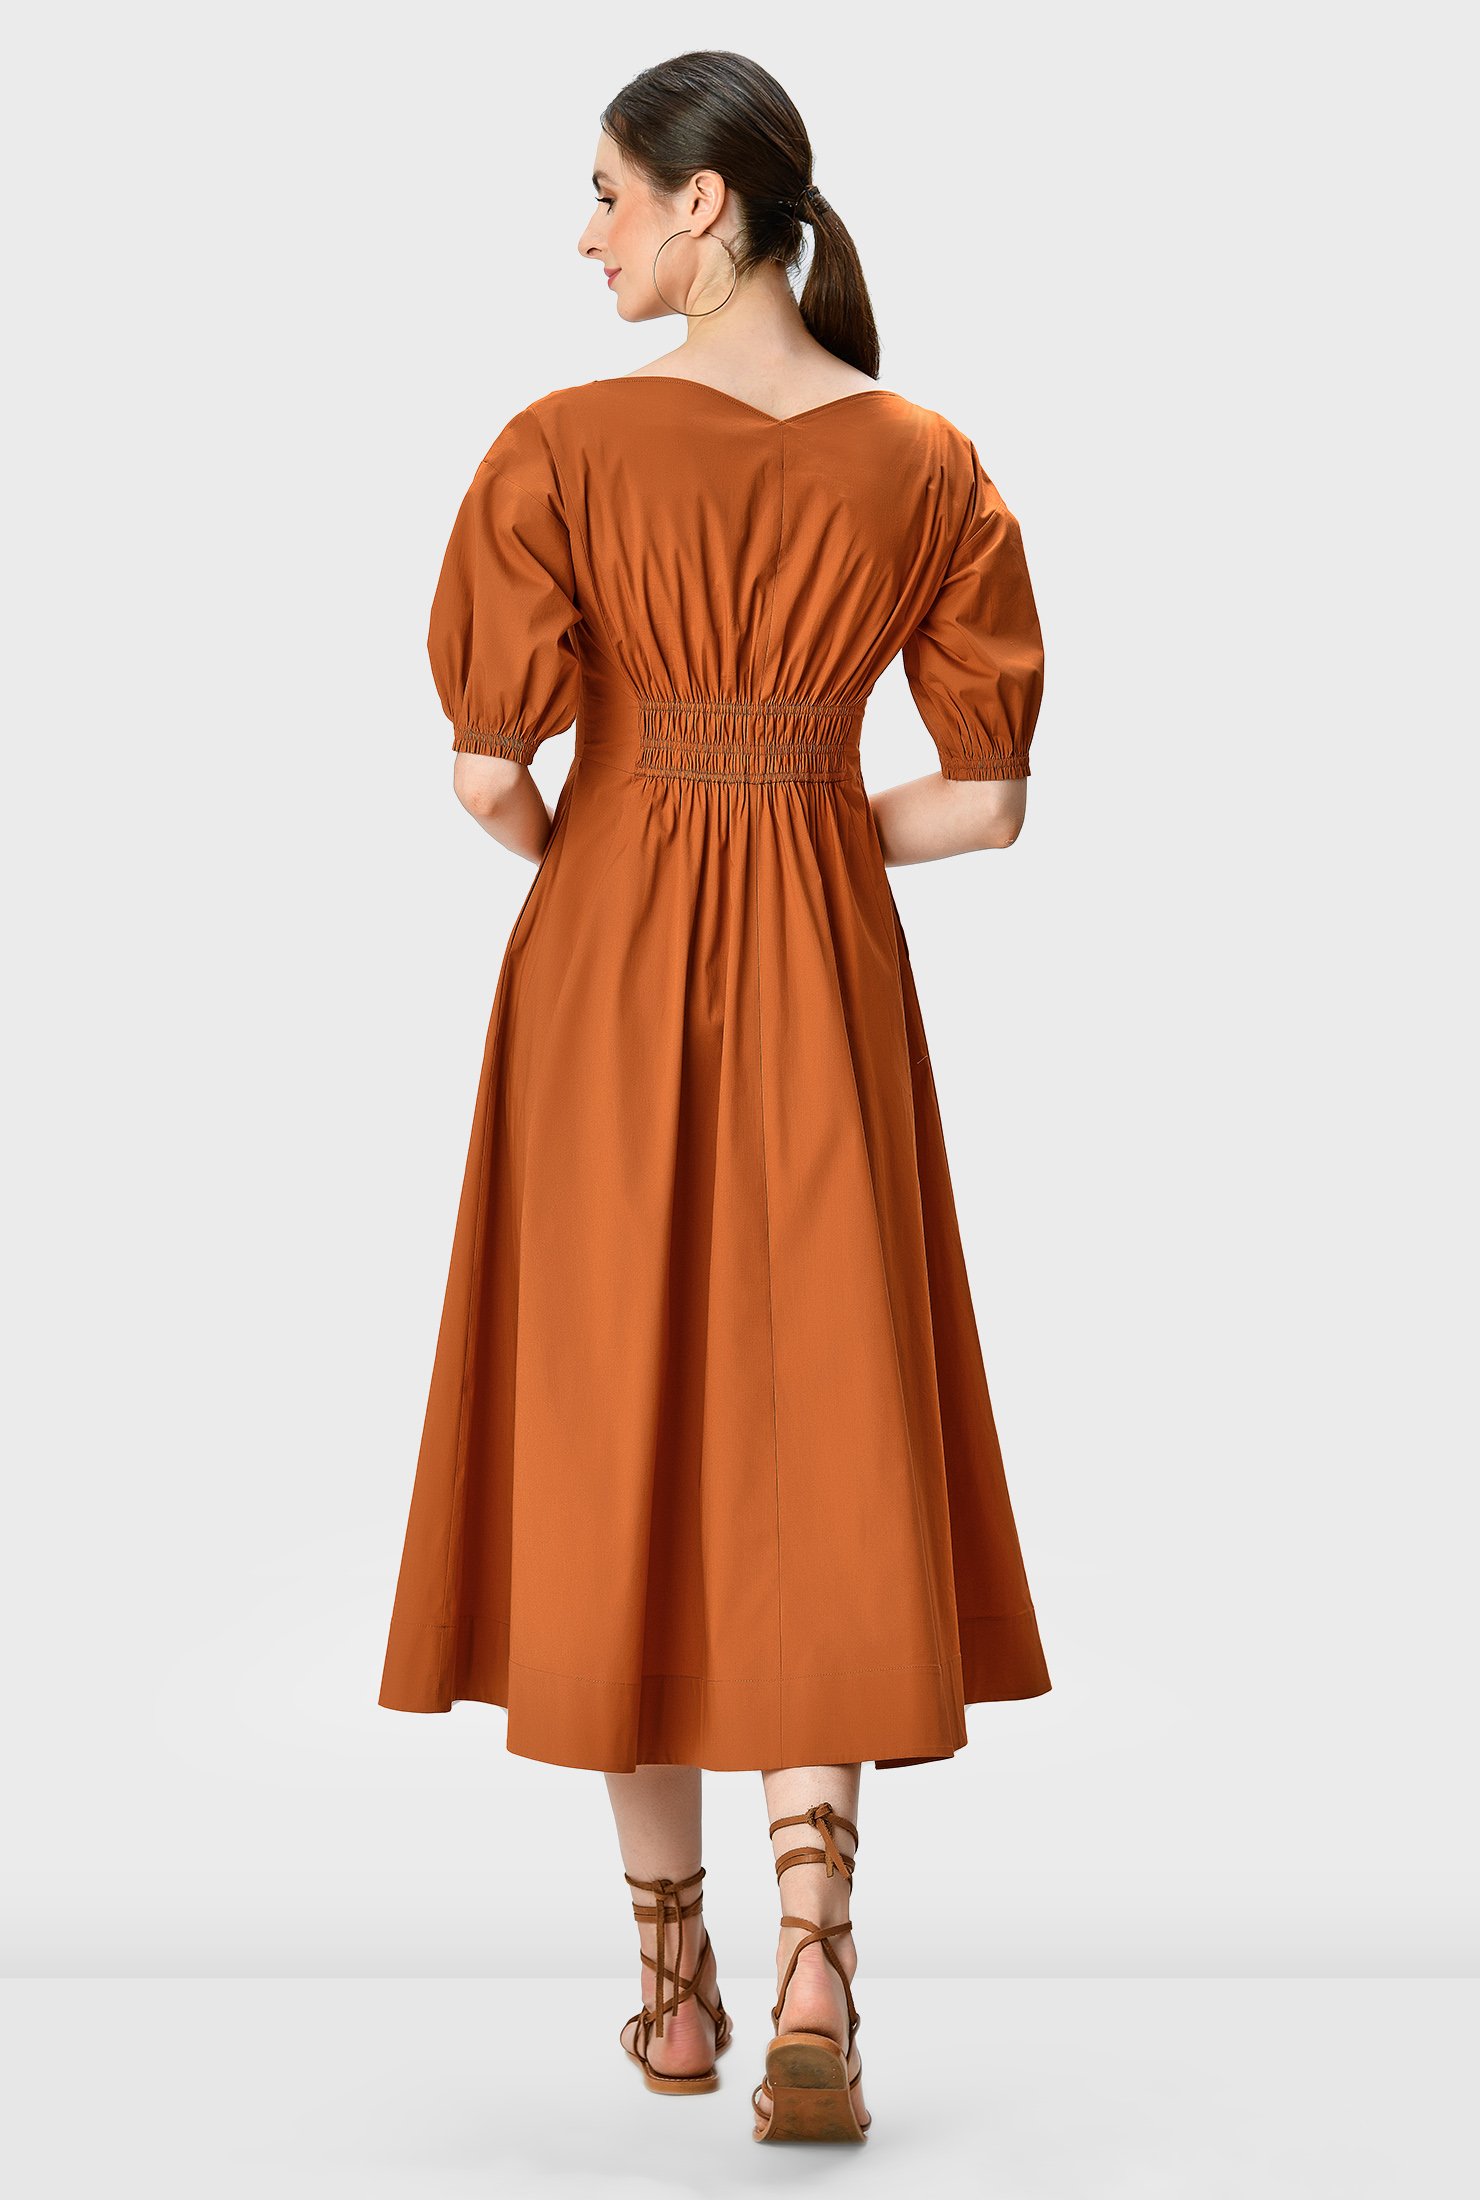 With its lightly voluminous silhouette, our cotton poplin dress is topped with a sweetheart neckline and cinched in at the shirred elastic waist.